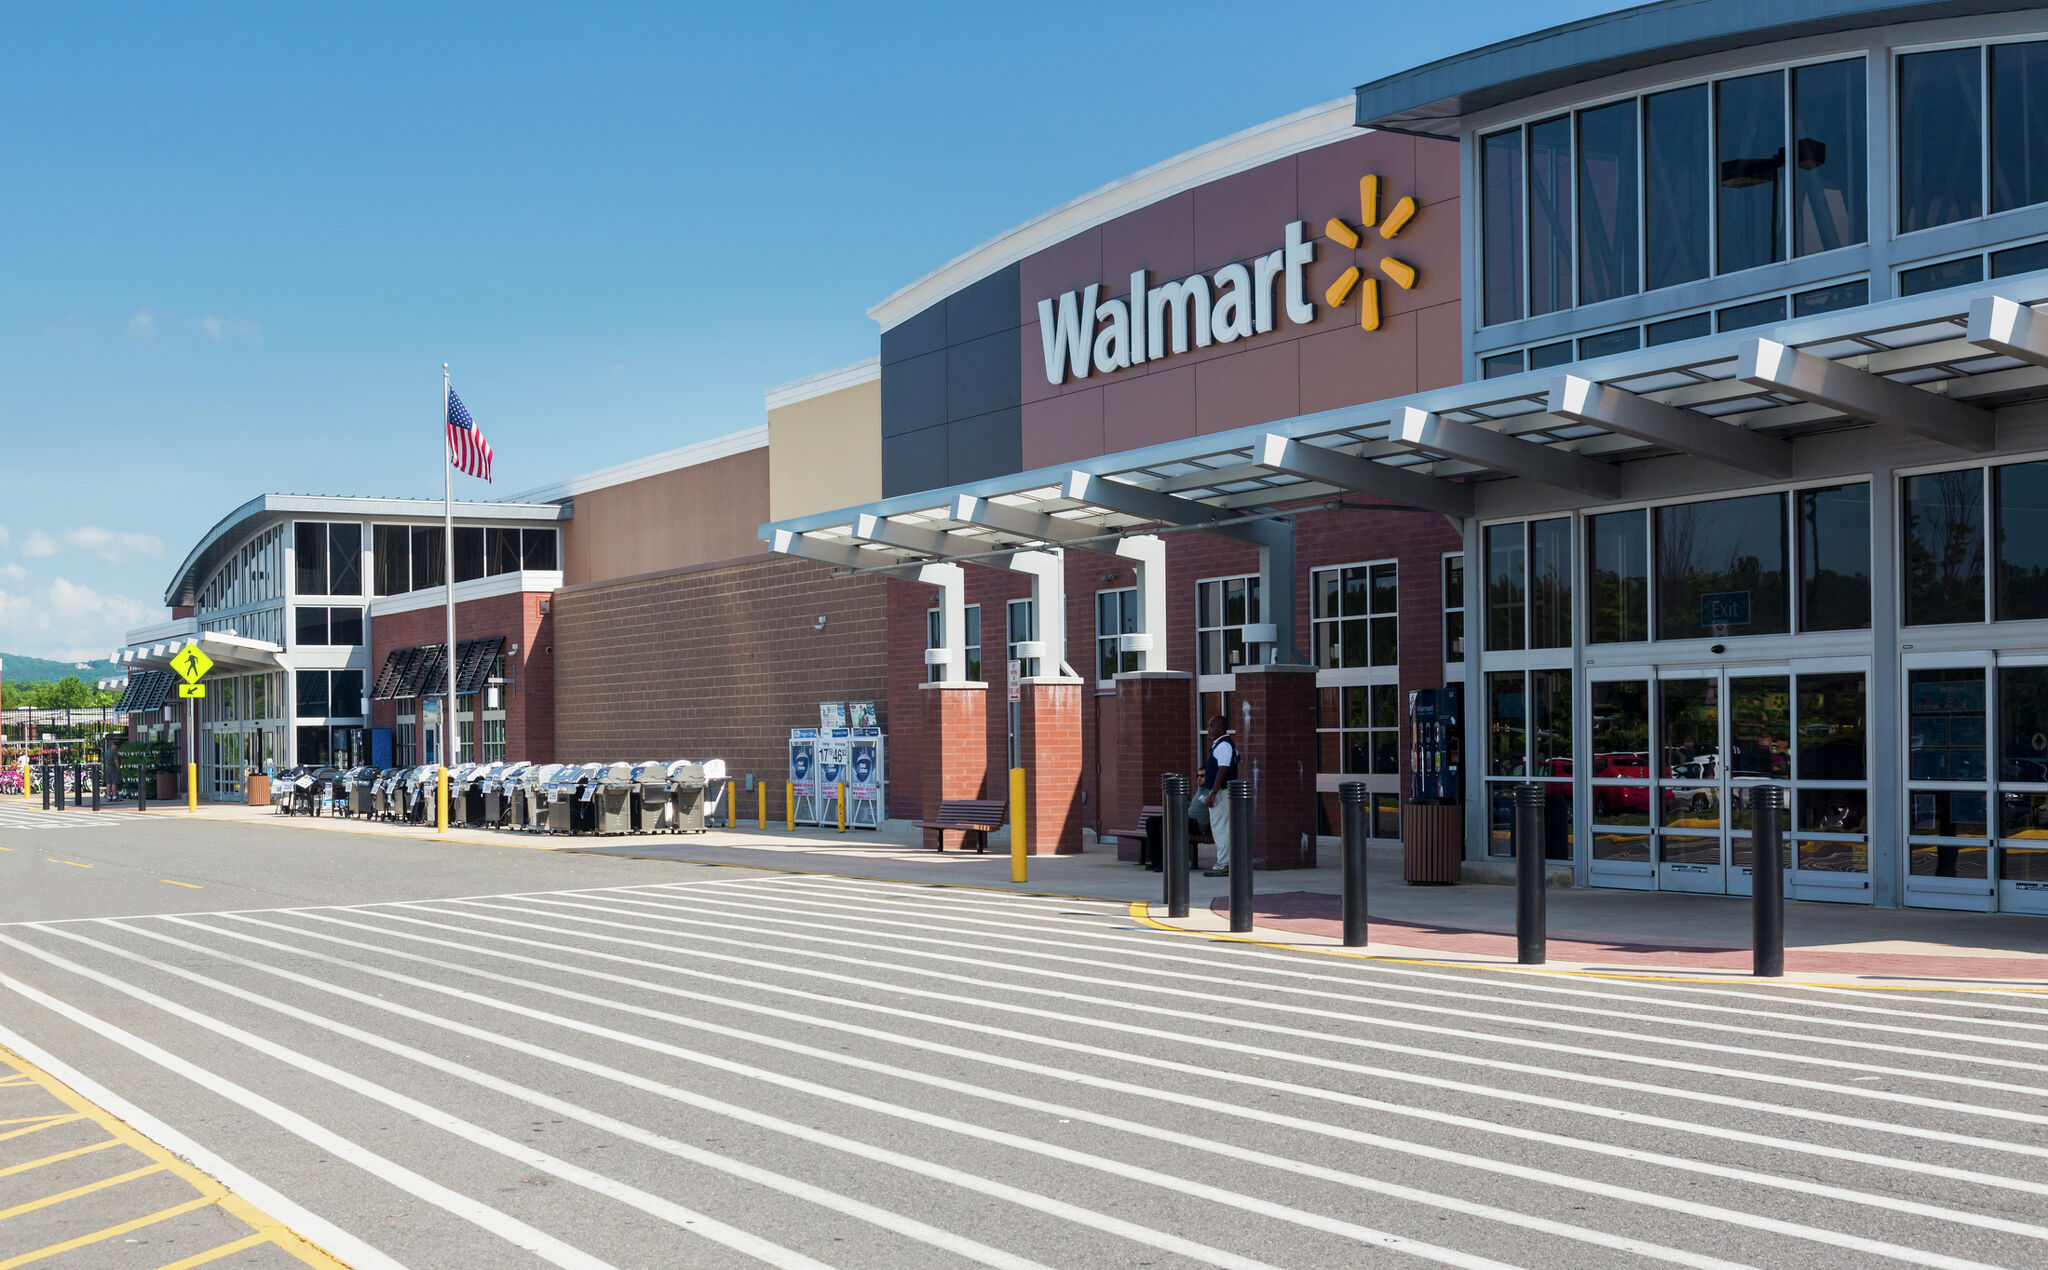  Walmart court early holiday shoppers in US with limited-time deals